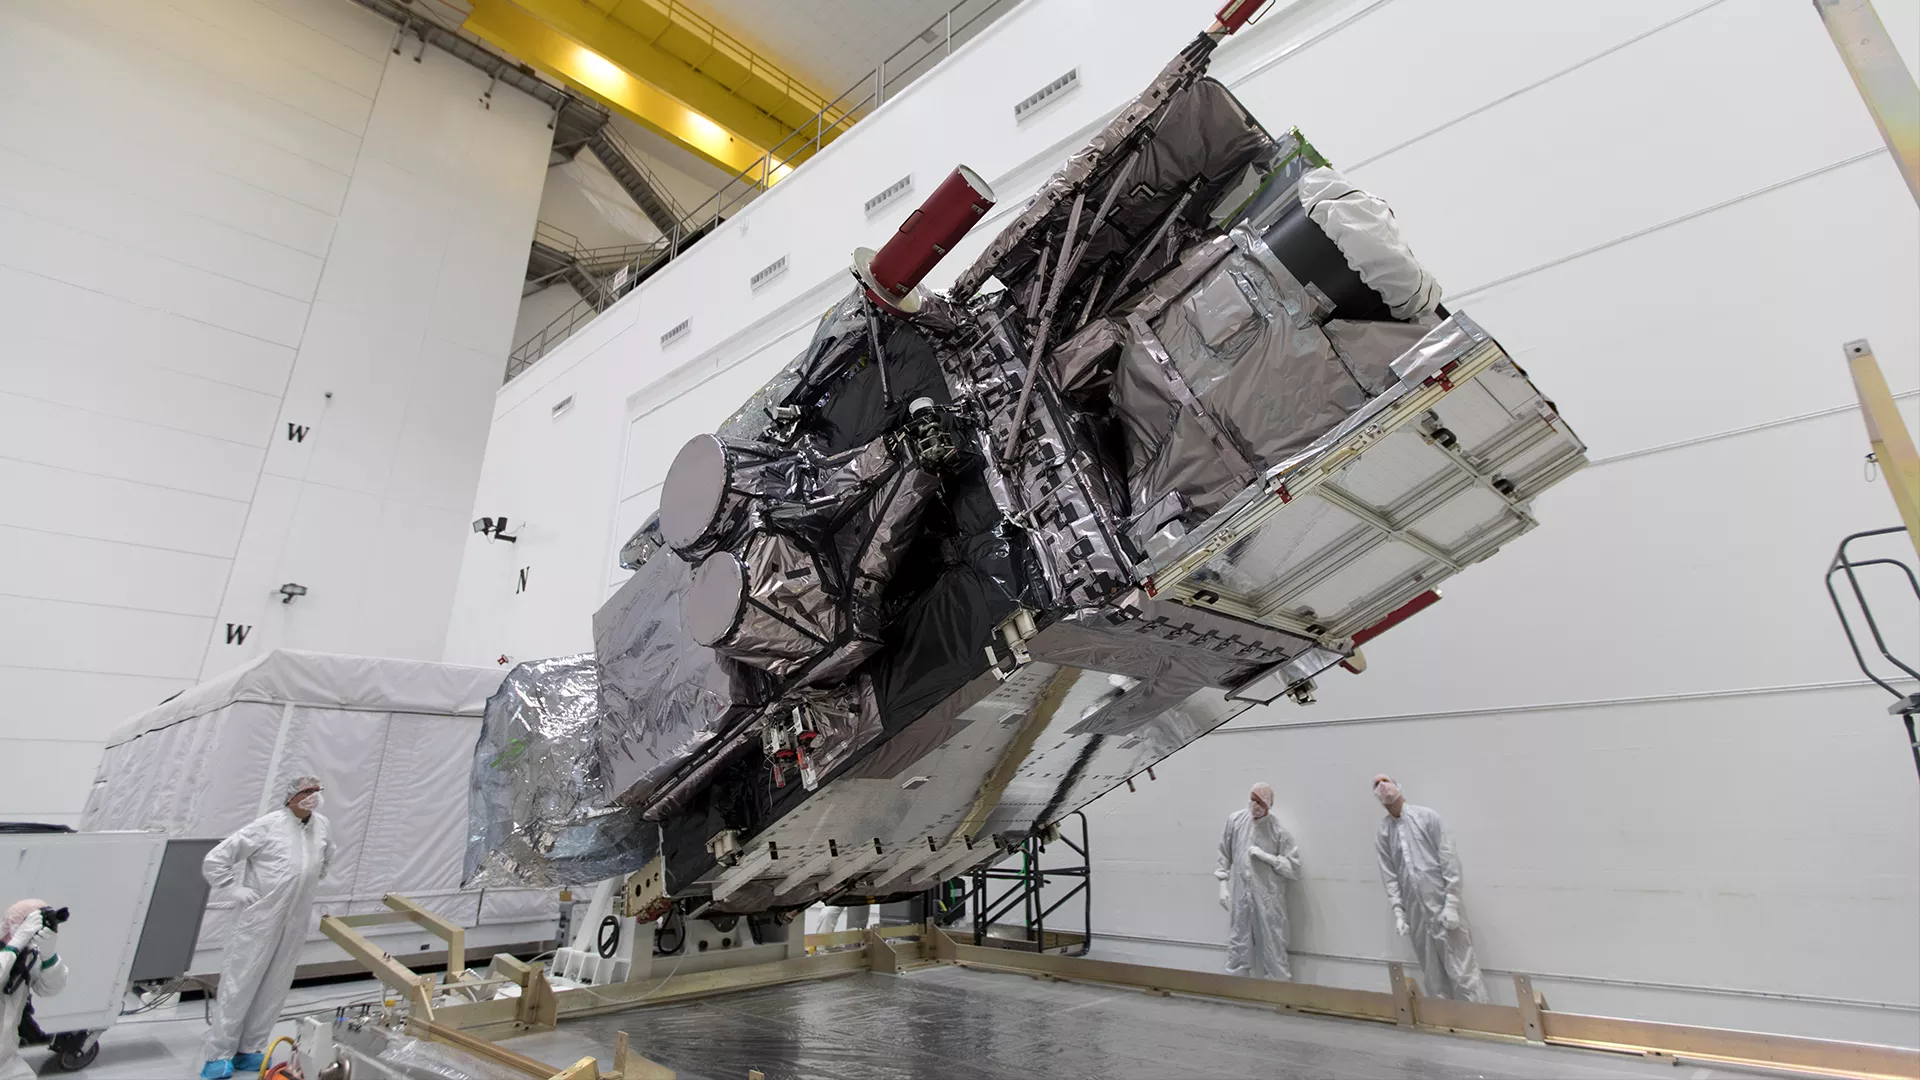 NOAA's GOES-S satellite is rotated to the vertical position after uncrating at Astrotech Space Operations in Titusville, Florida, so engineers can prepare the satellite for a March 2018 launch.